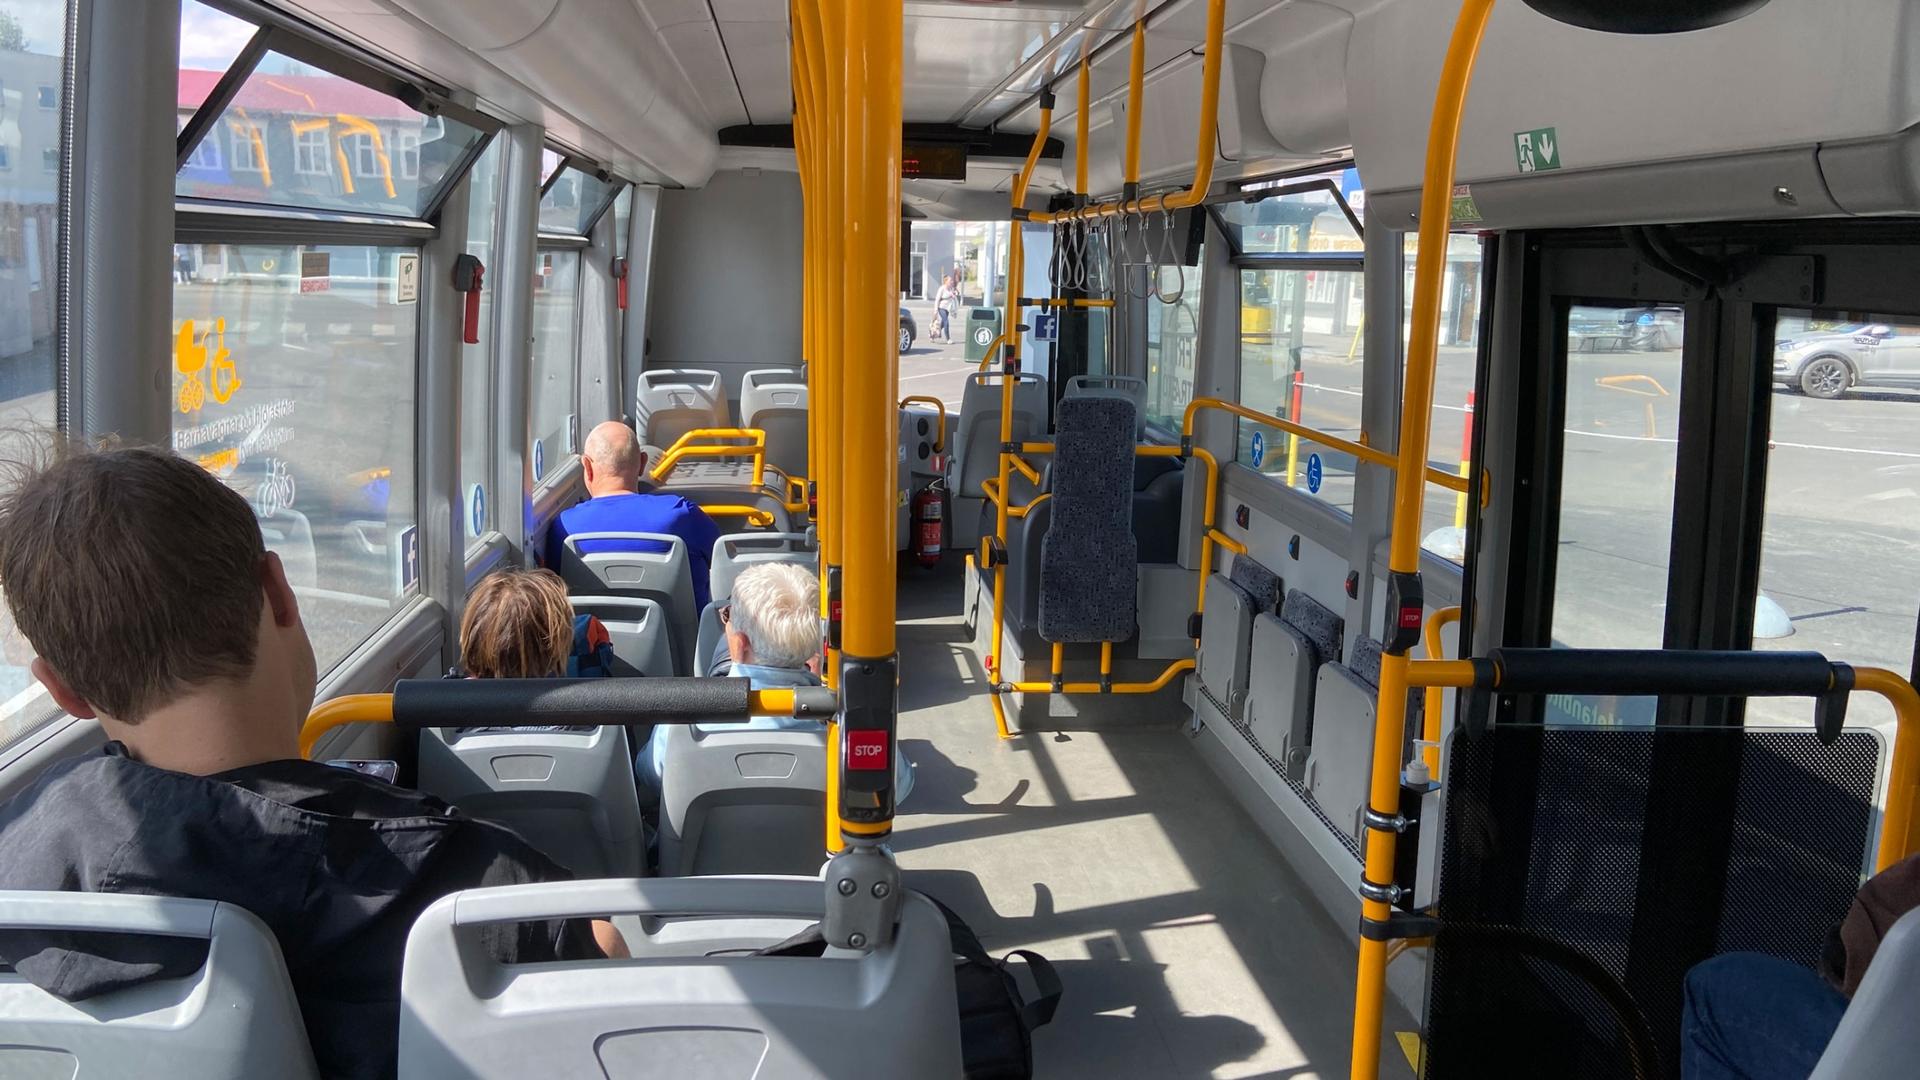 Methane captured from the town landfill is pumped to processing stations and converted into fuel for all of Akureyri’s public buses. Which are free to ride.